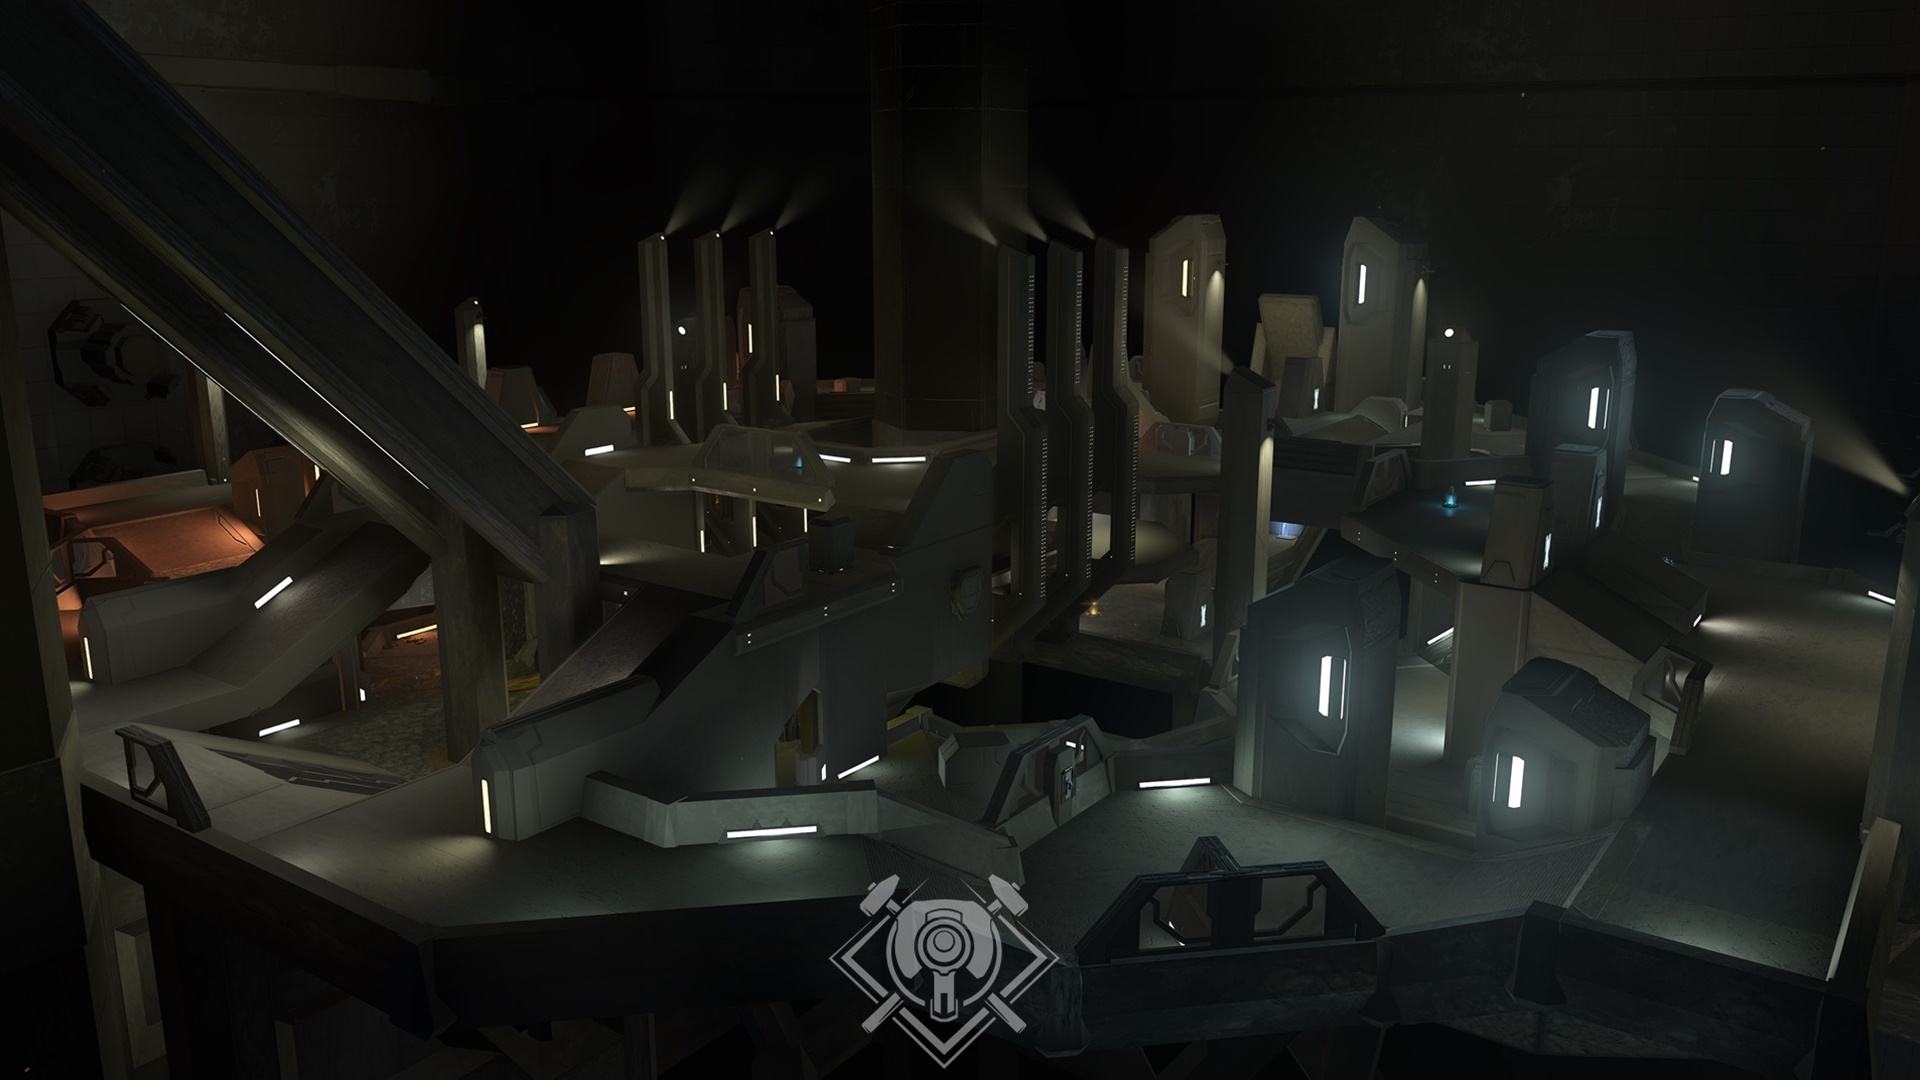 Forge Features module image of the map Purgatory created in Halo Infinite's Forge